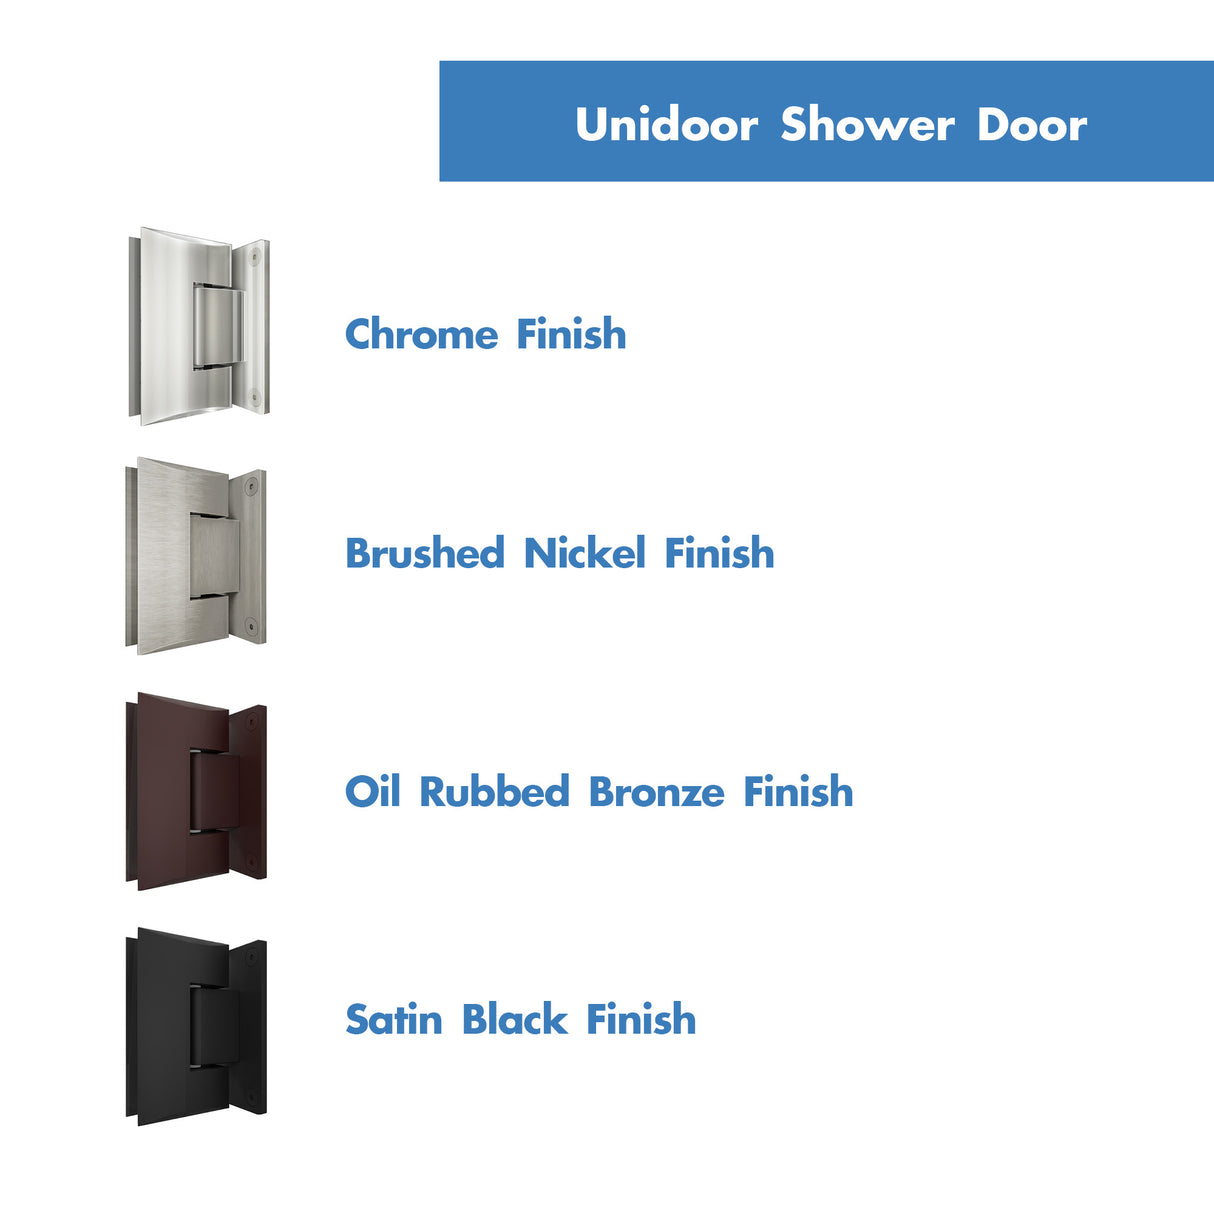 DreamLine Unidoor 35-36 in. W x 72 in. H Frameless Hinged Shower Door with Support Arm in Chrome